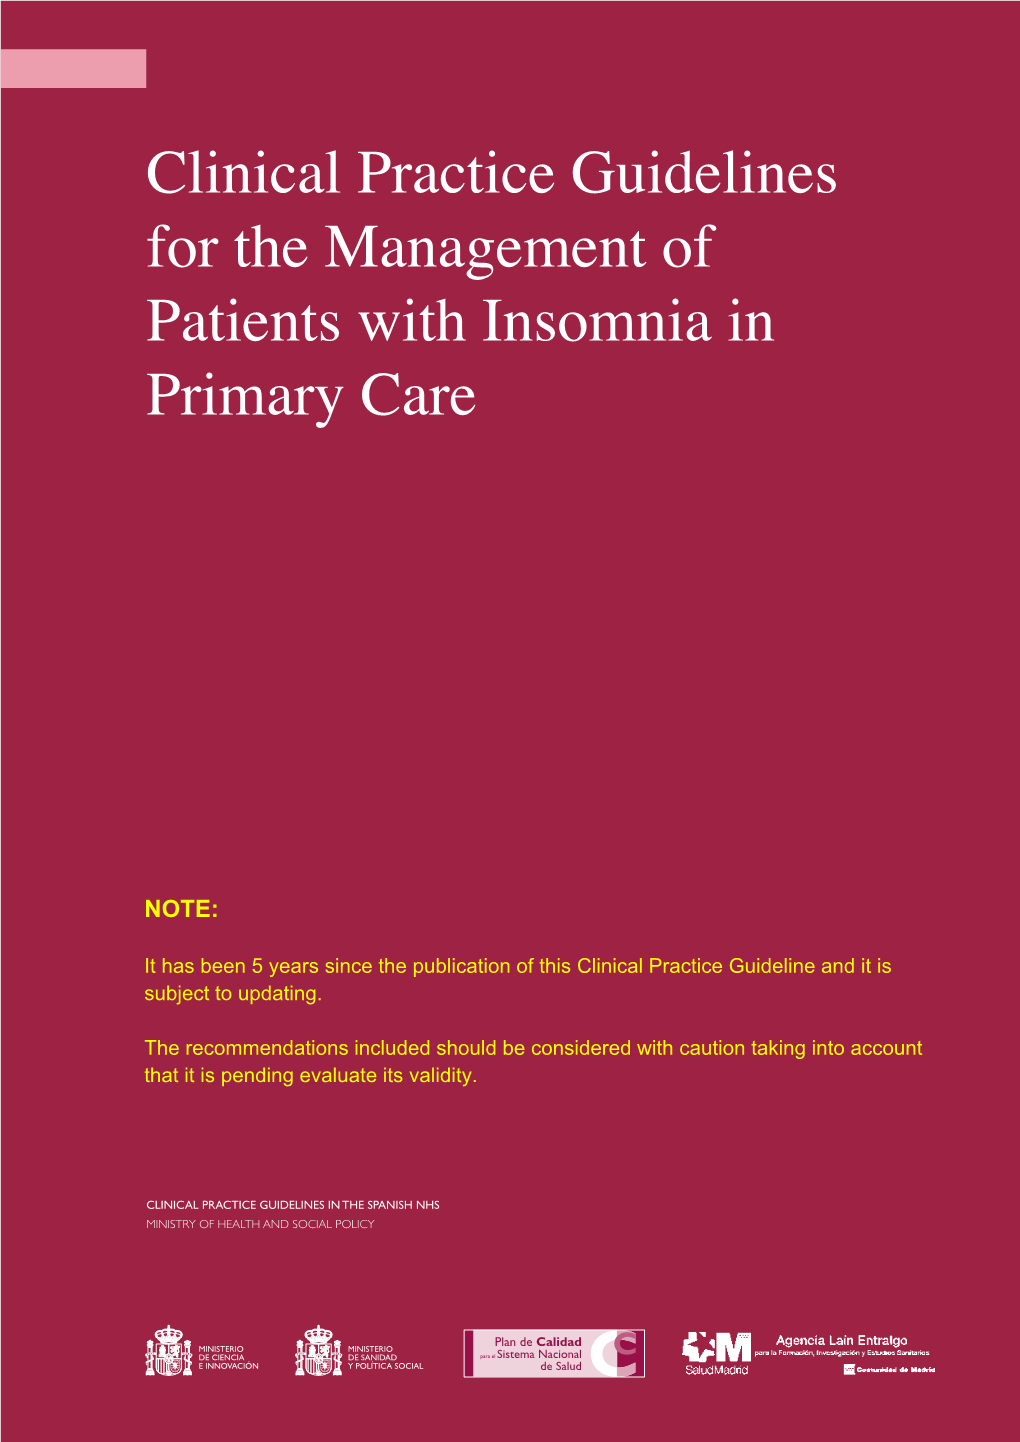 Clinical Practice Guidelines for the Management of Patients with Insomnia in Primary Care